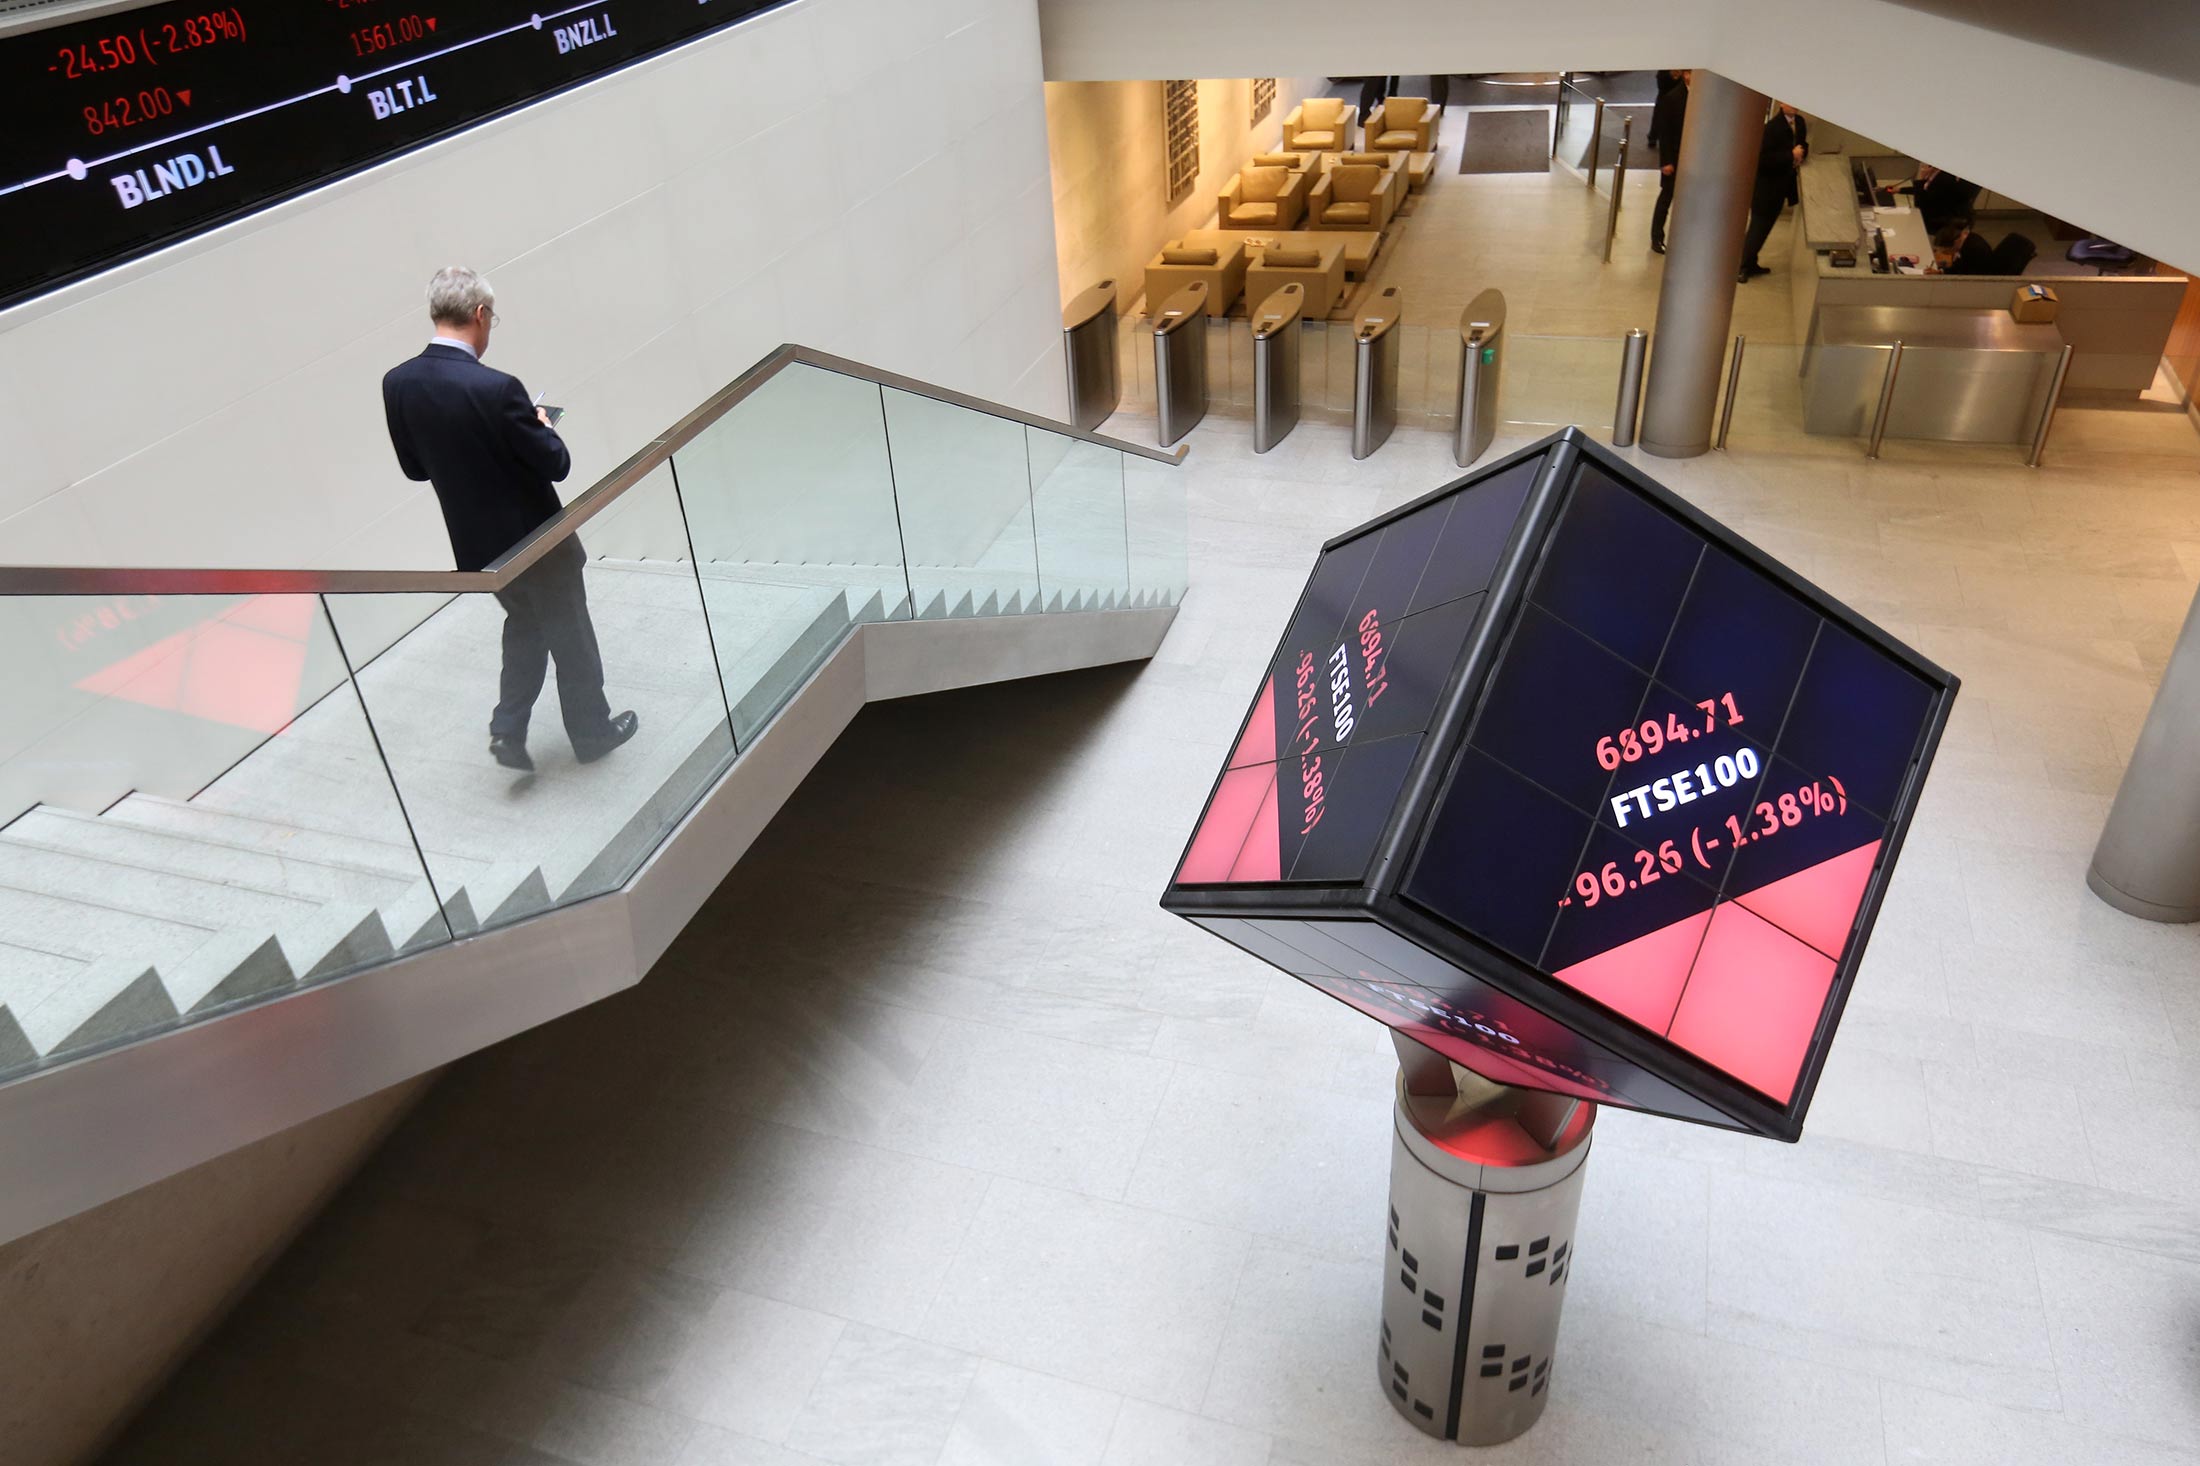 London Stock Exchange Group Plc's offices.
